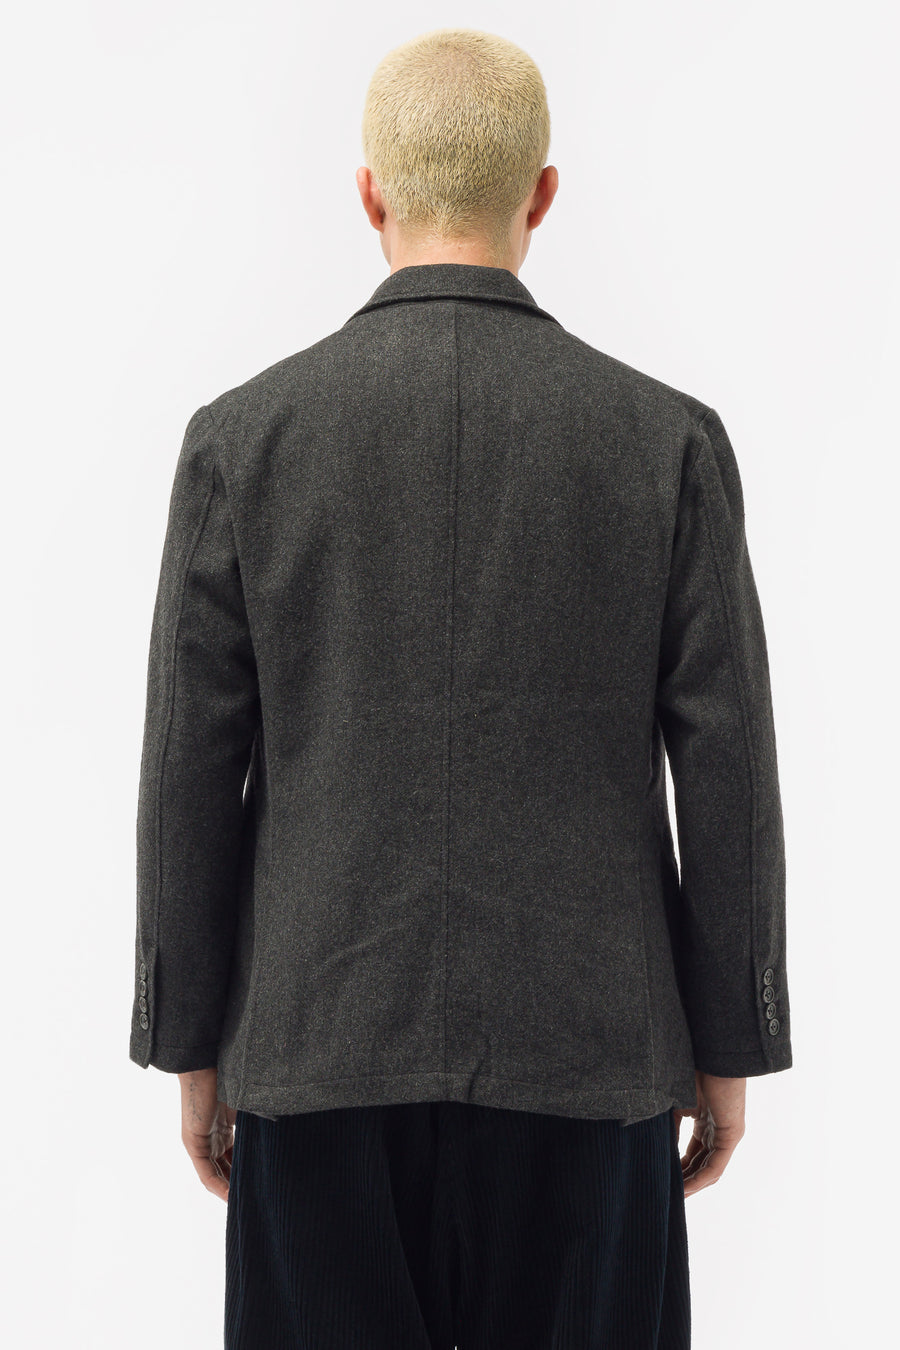 Engineered Garments - Andover Jacket in Grey Solid Poly Wool